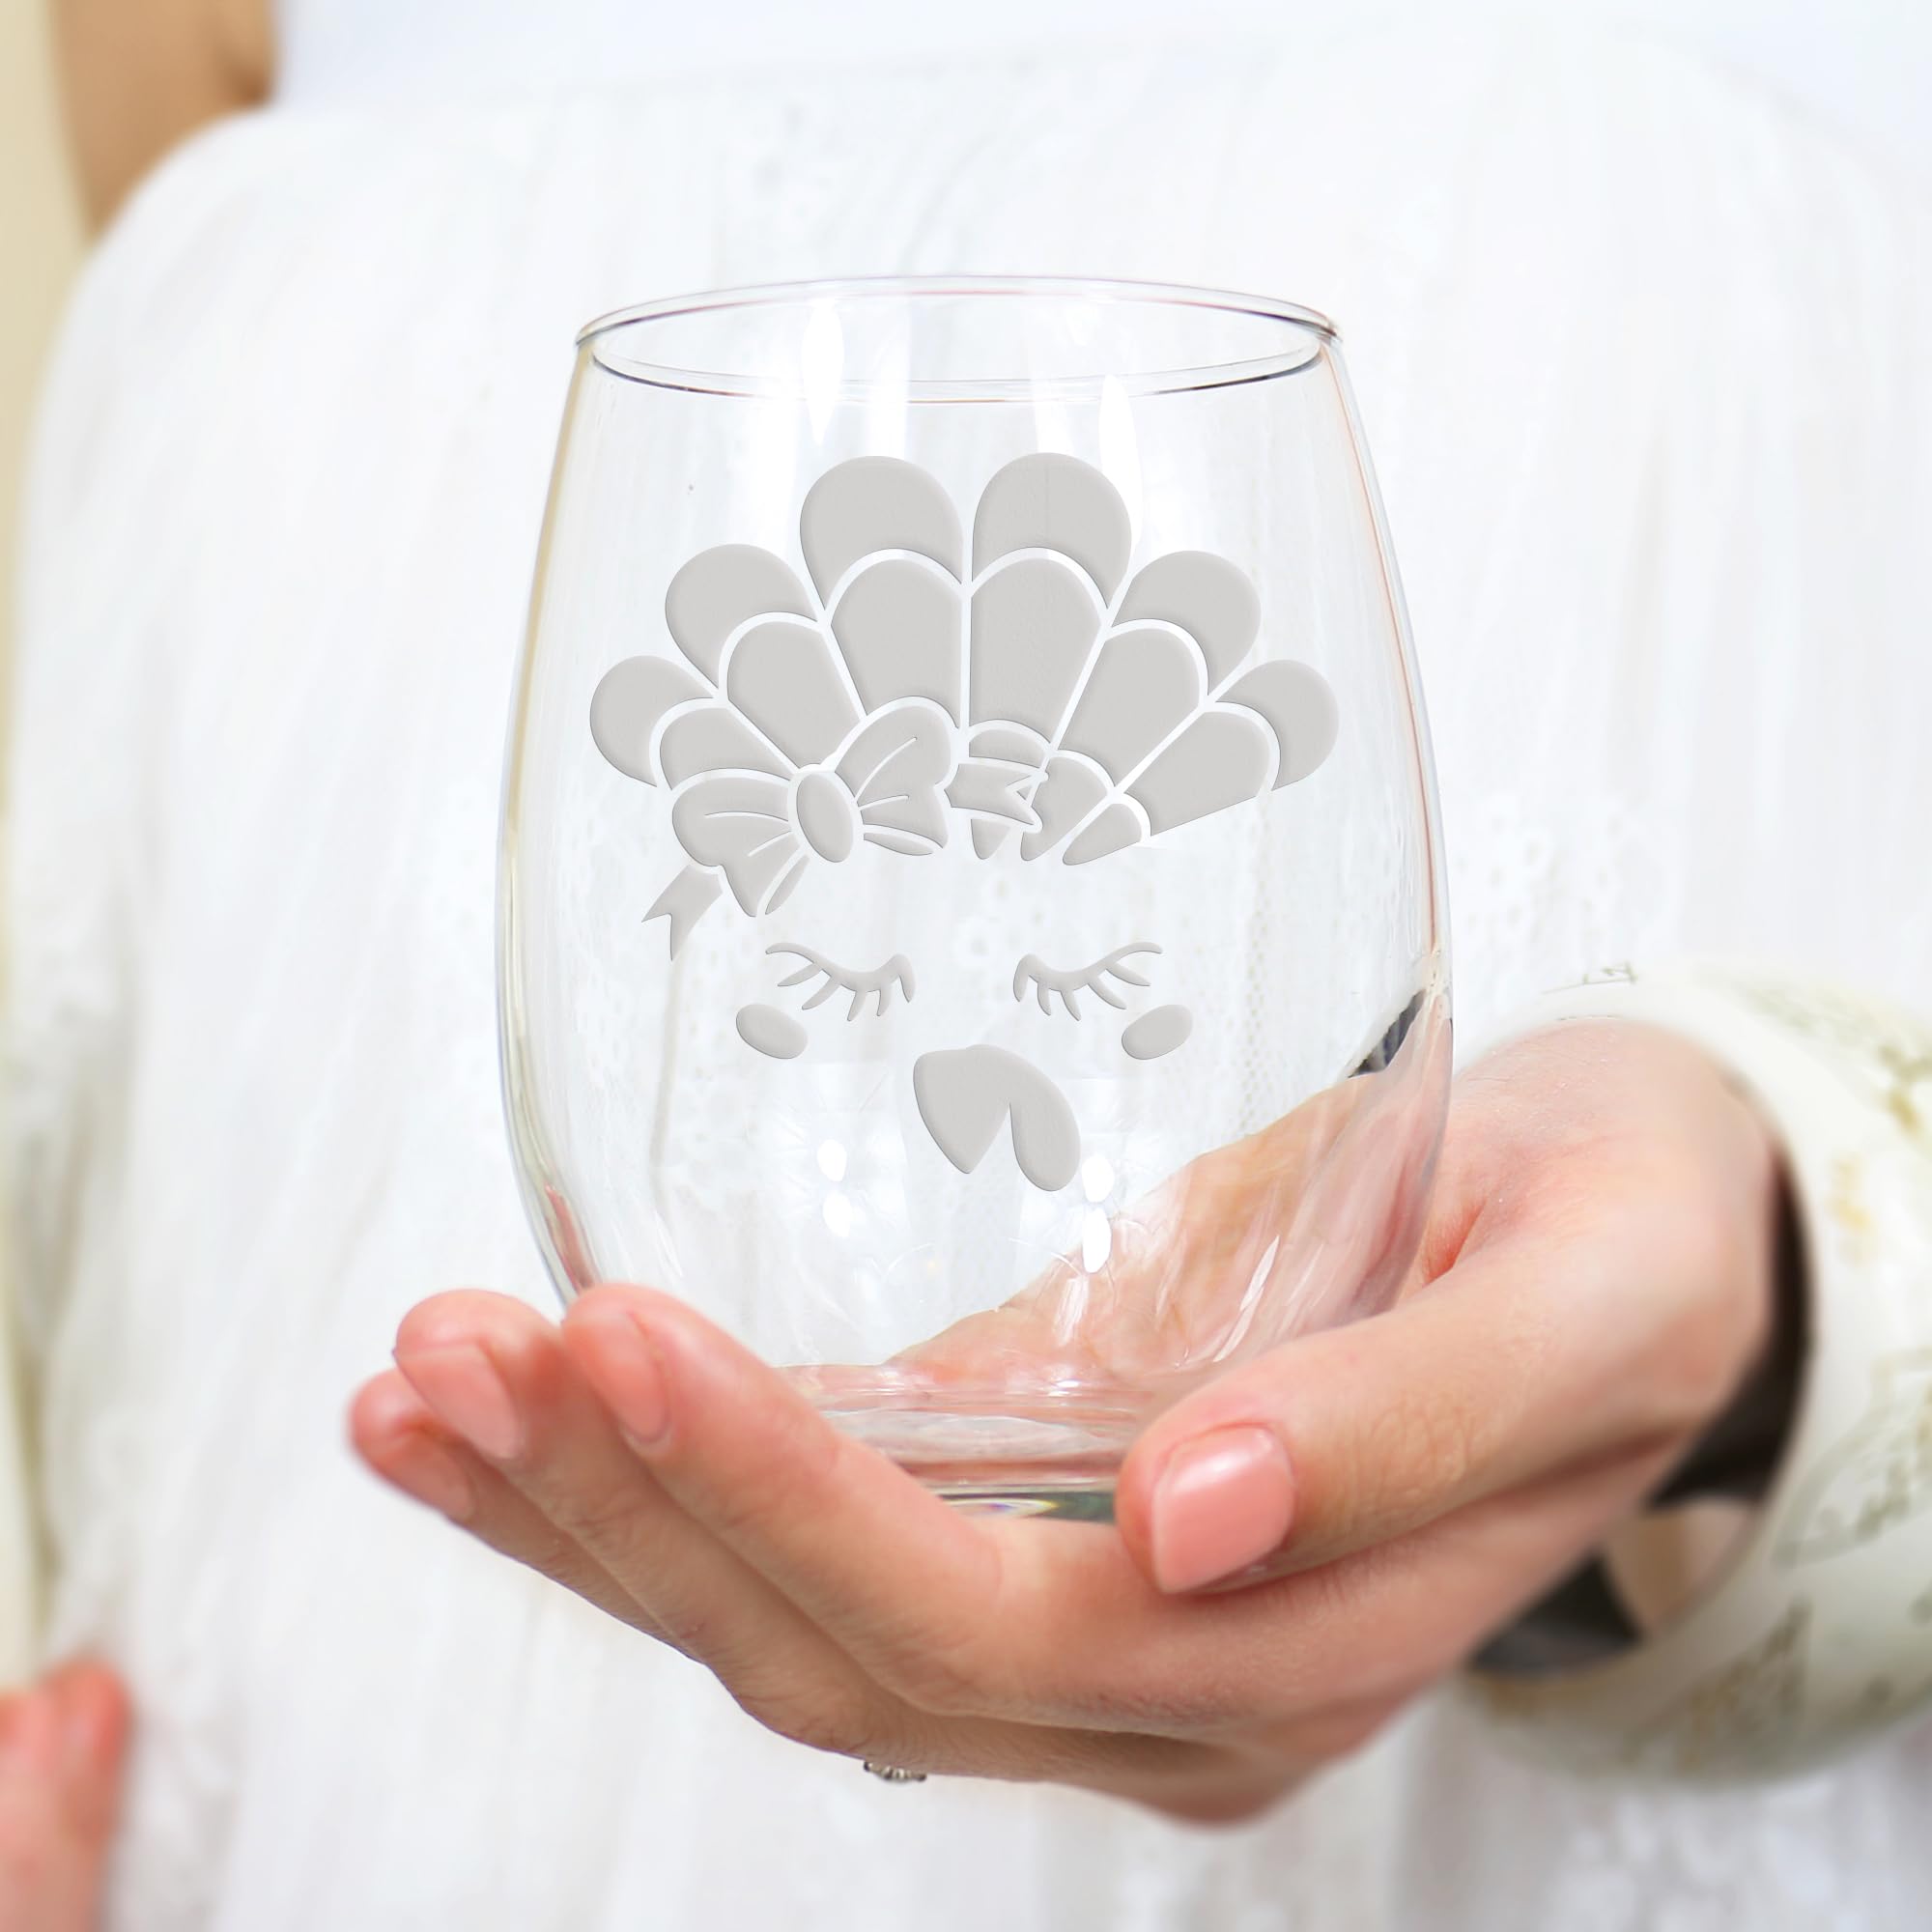 Turkey Face With Bow Stemless Wine Glass - Turkey Gift, Fall Gift, Autumn Gift, thanksgiving Gift, Turkey Wine Glass, Fall Wine Glass